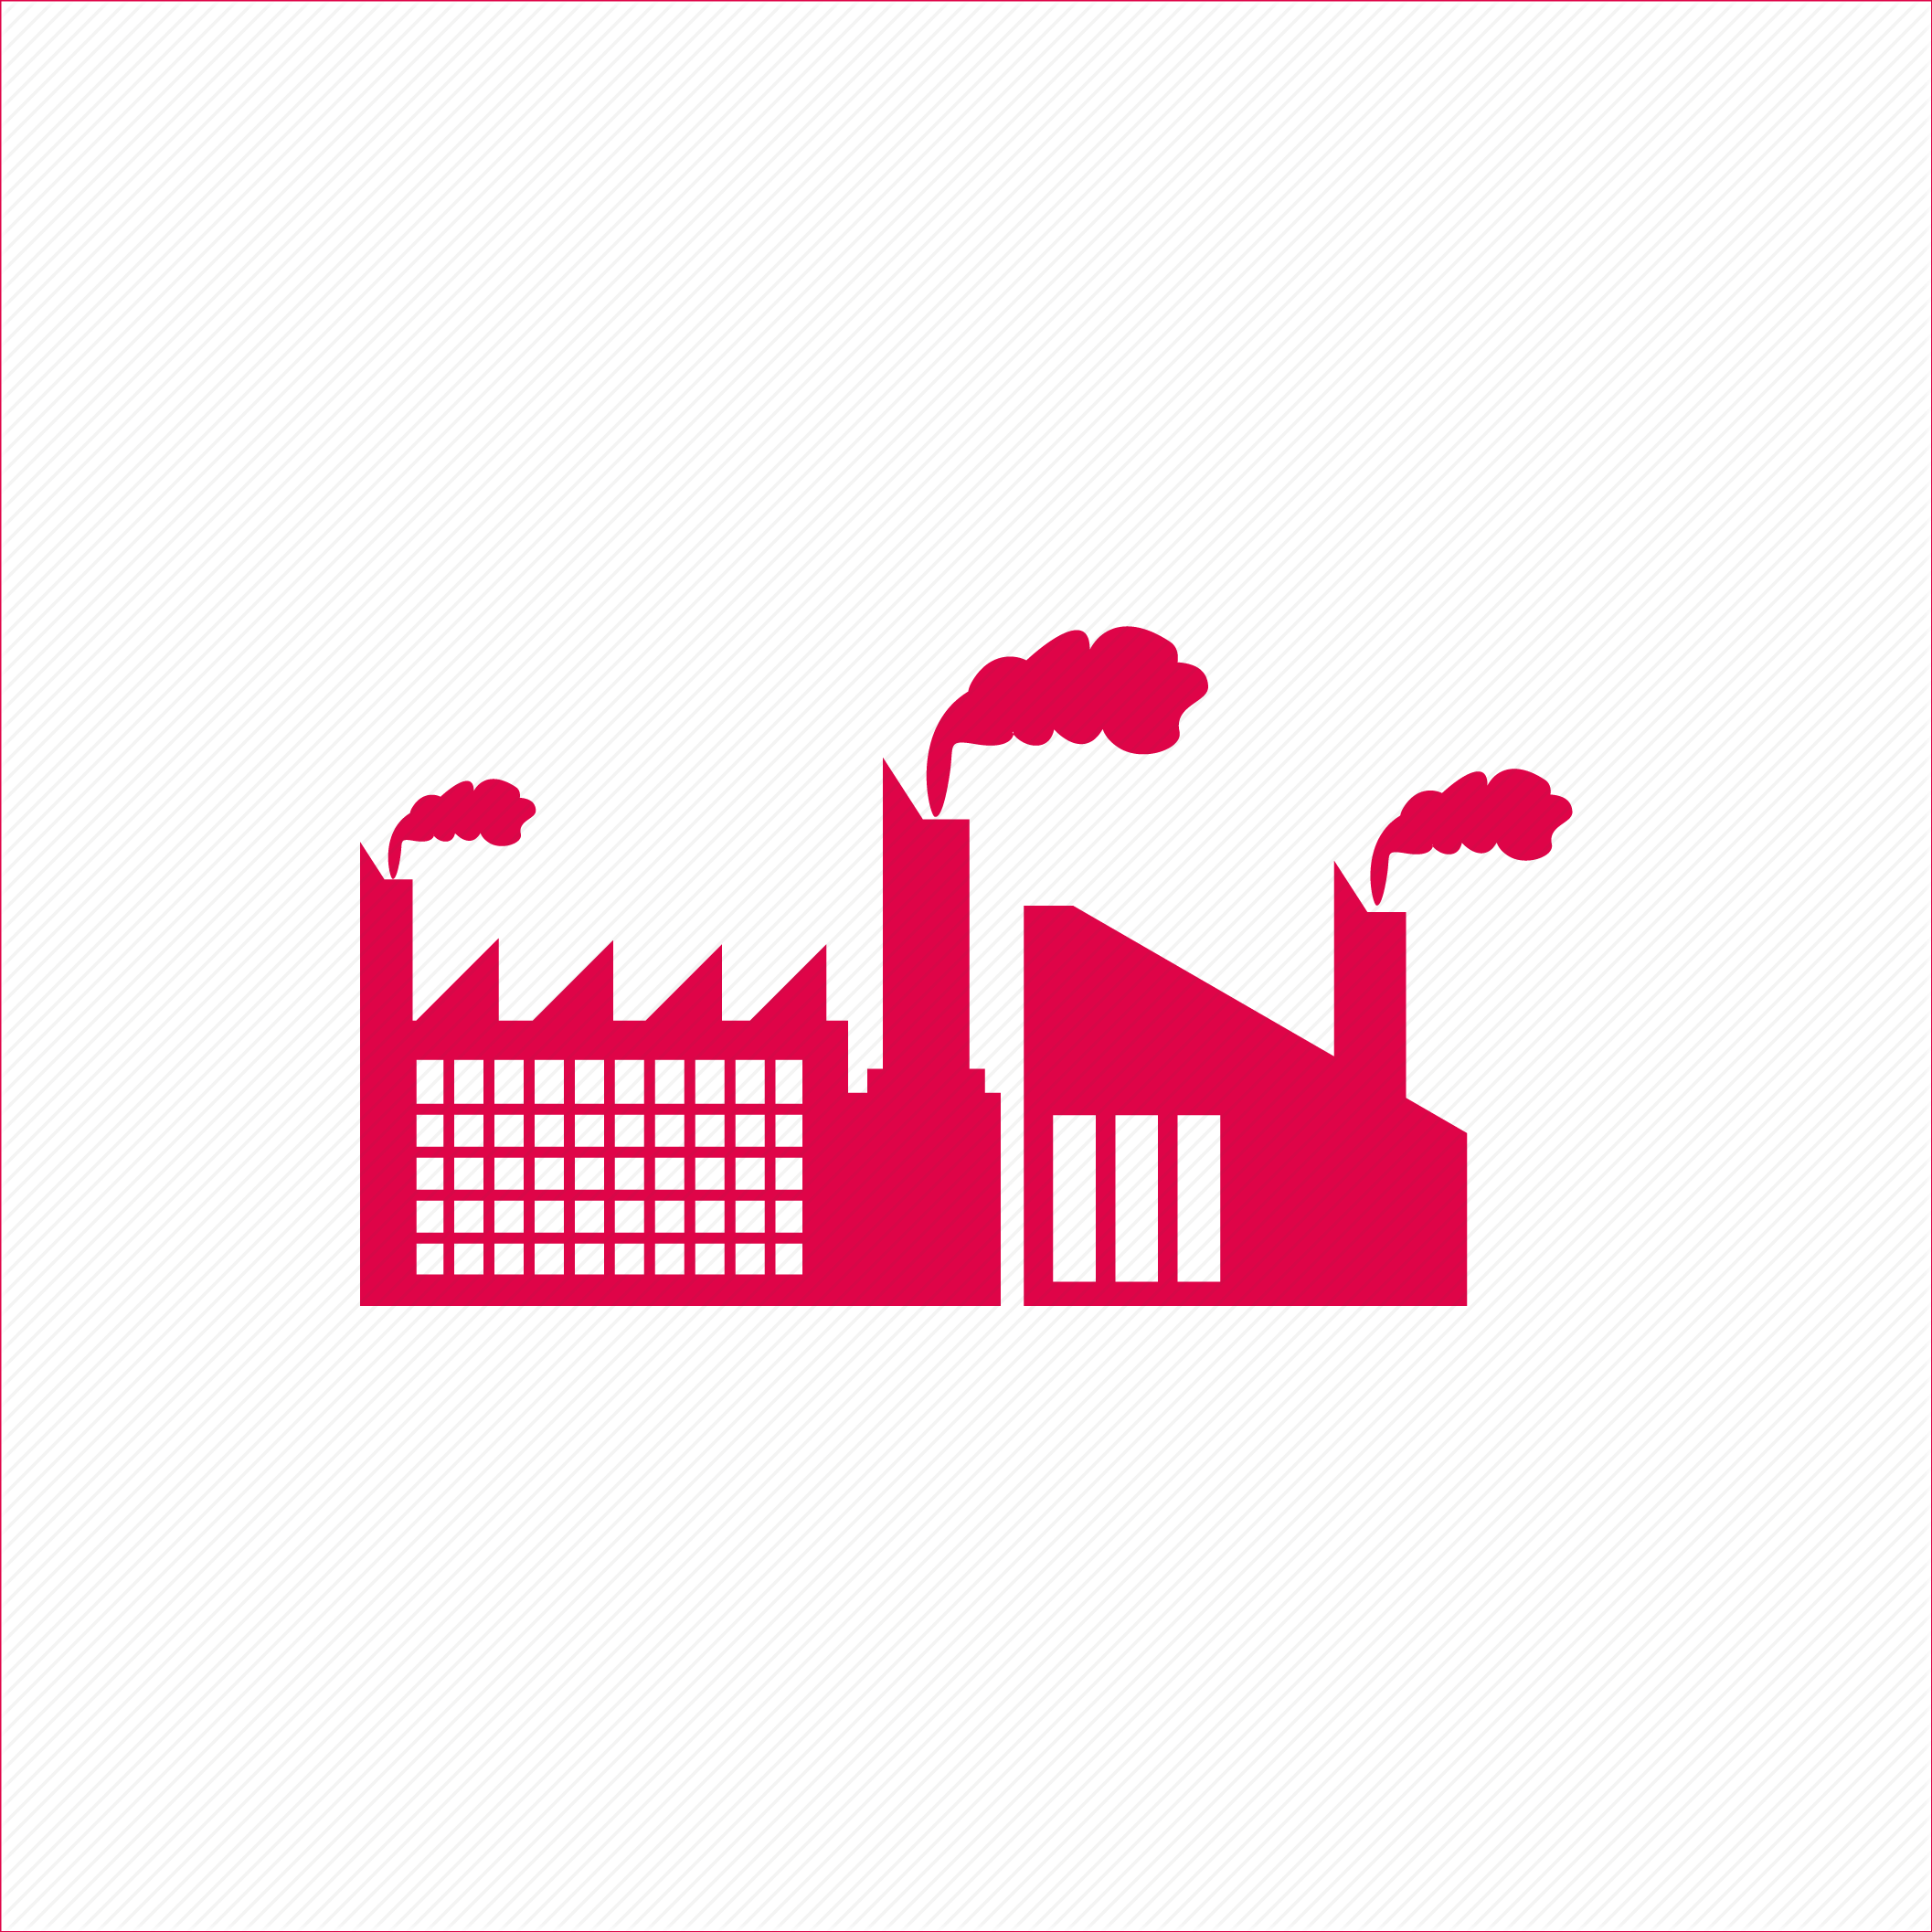 factory clipart industrial city